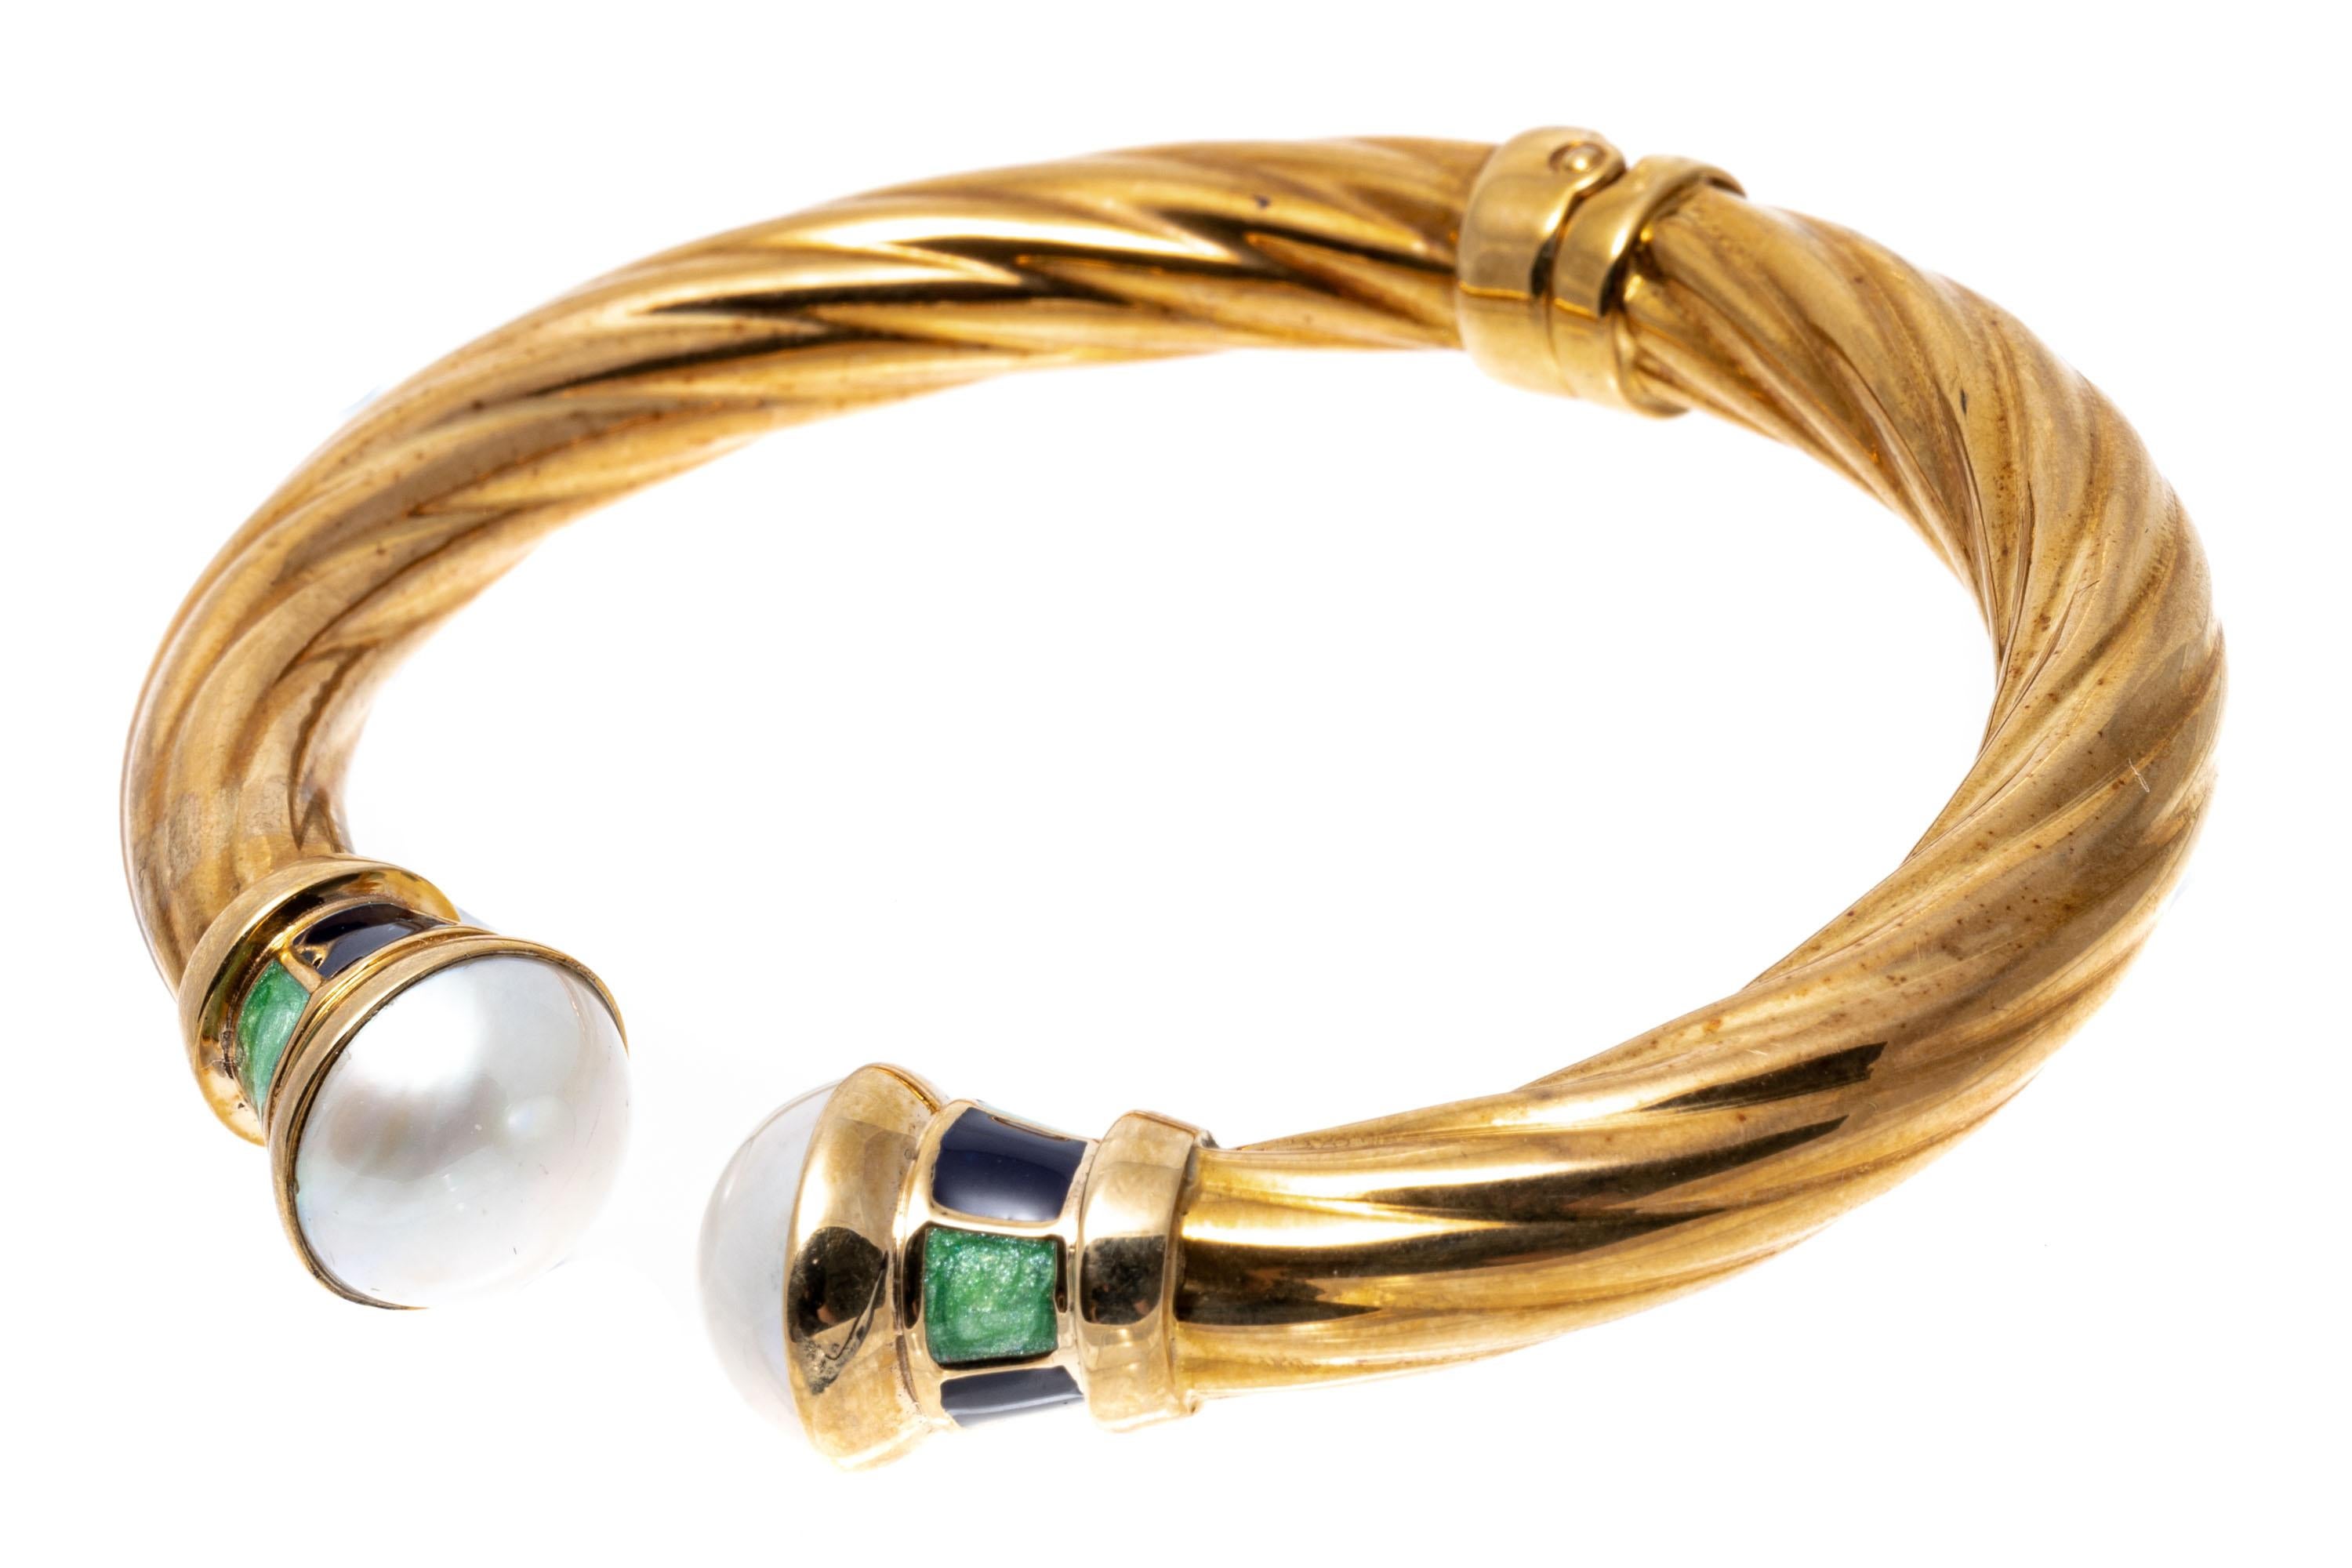 14k Gold Ribbed Open Cuff Bangle Bracelet Set with Mabe Pearls and Enamel In Good Condition For Sale In Southport, CT